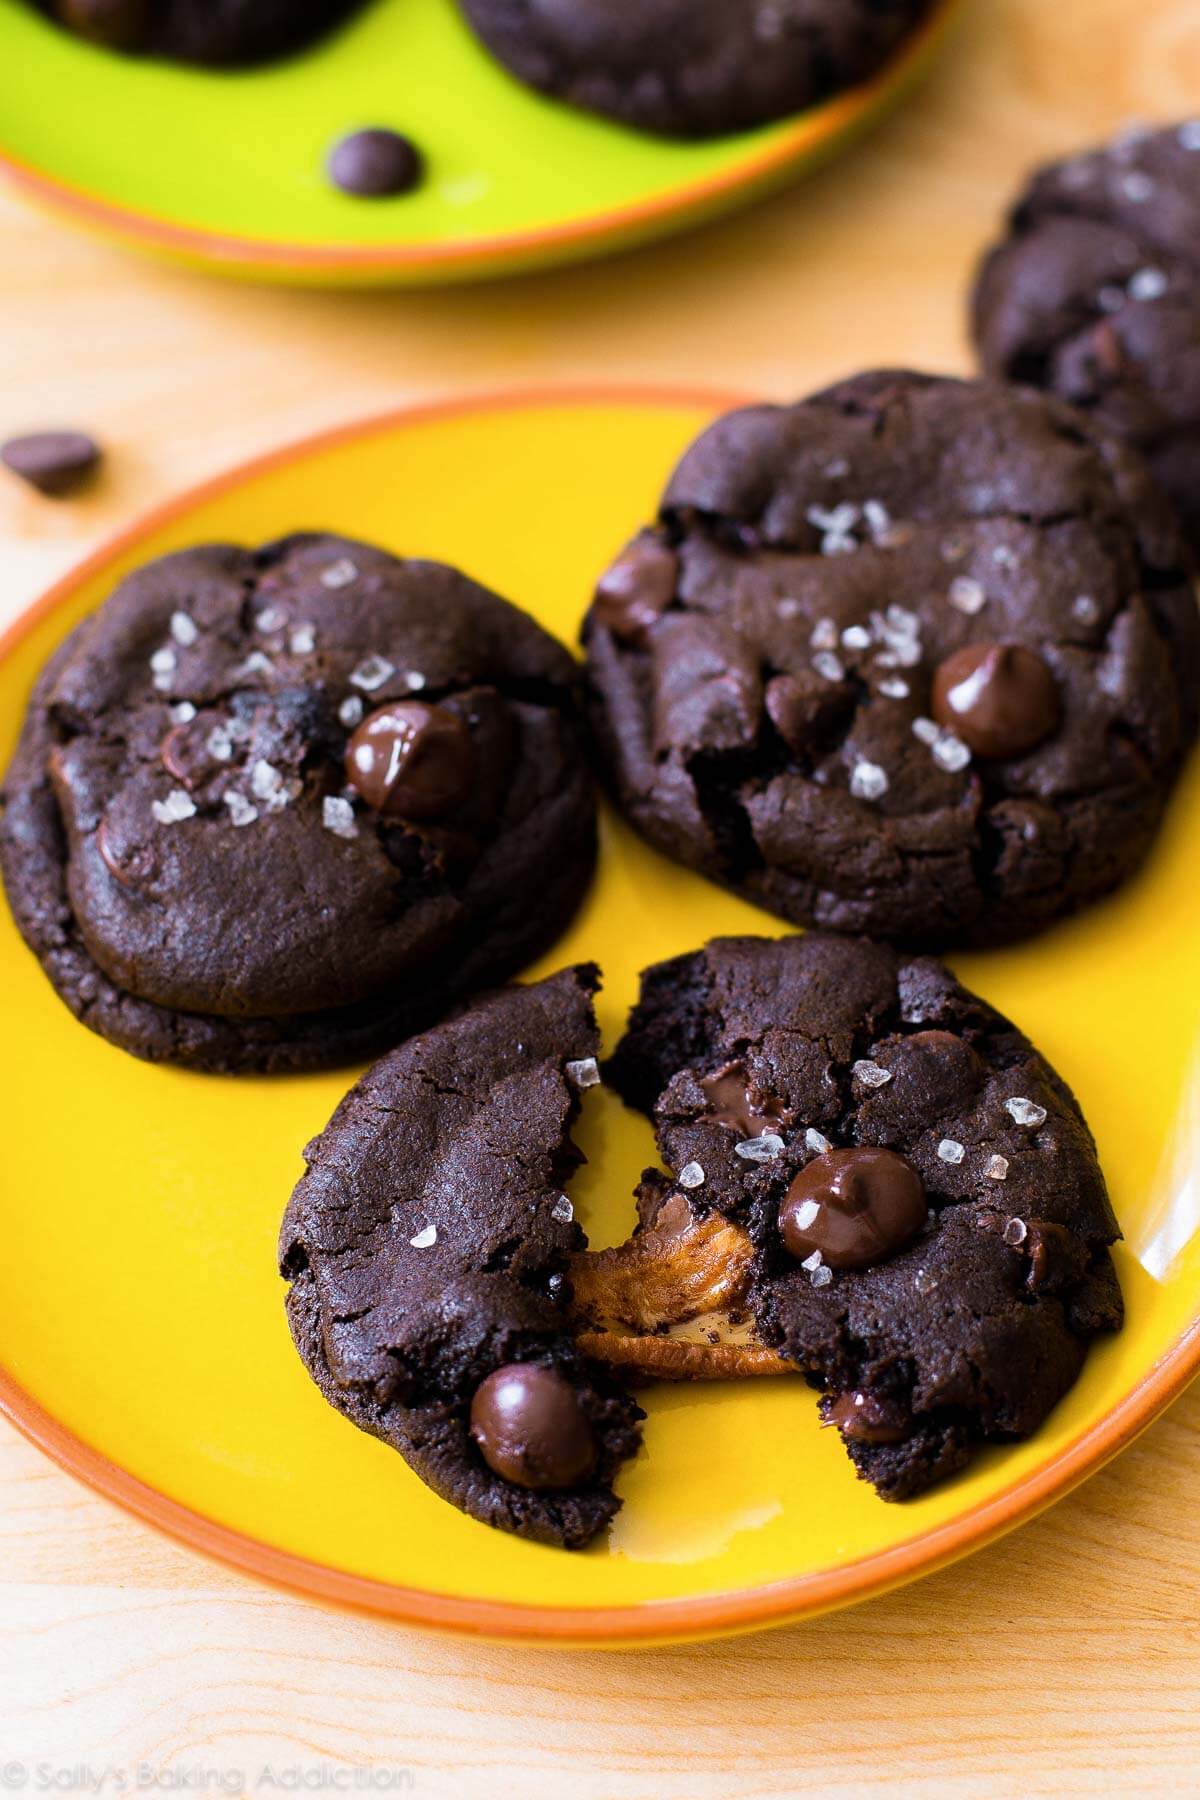 Dark chocolate cookies with sea salt and caramel on a yellow plate